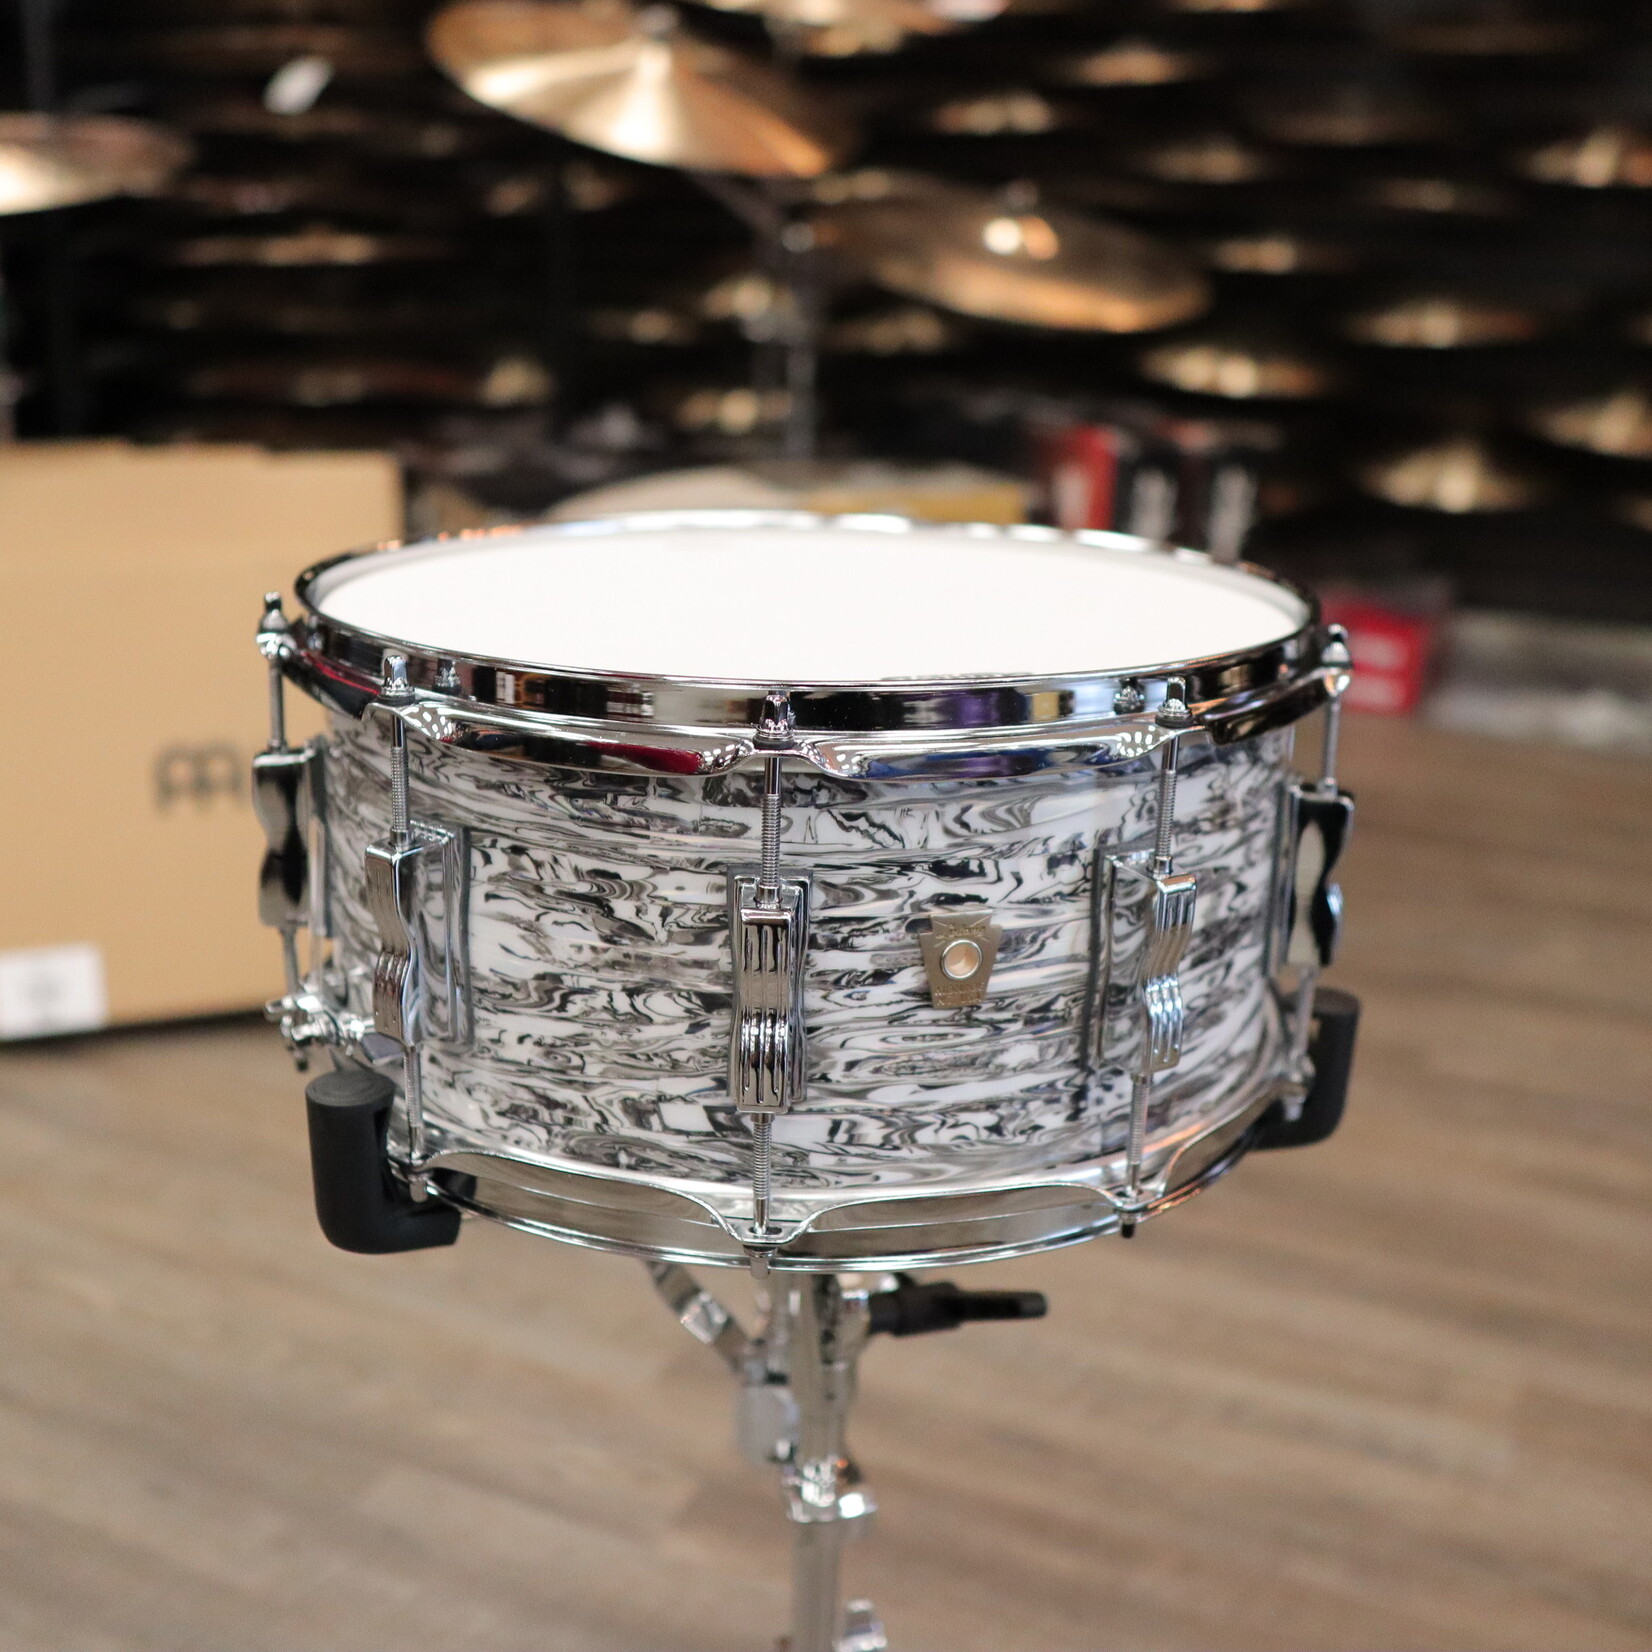 Ludwig Ludwig Classic Maple 6.5x14" Snare Drum (White Abalone)